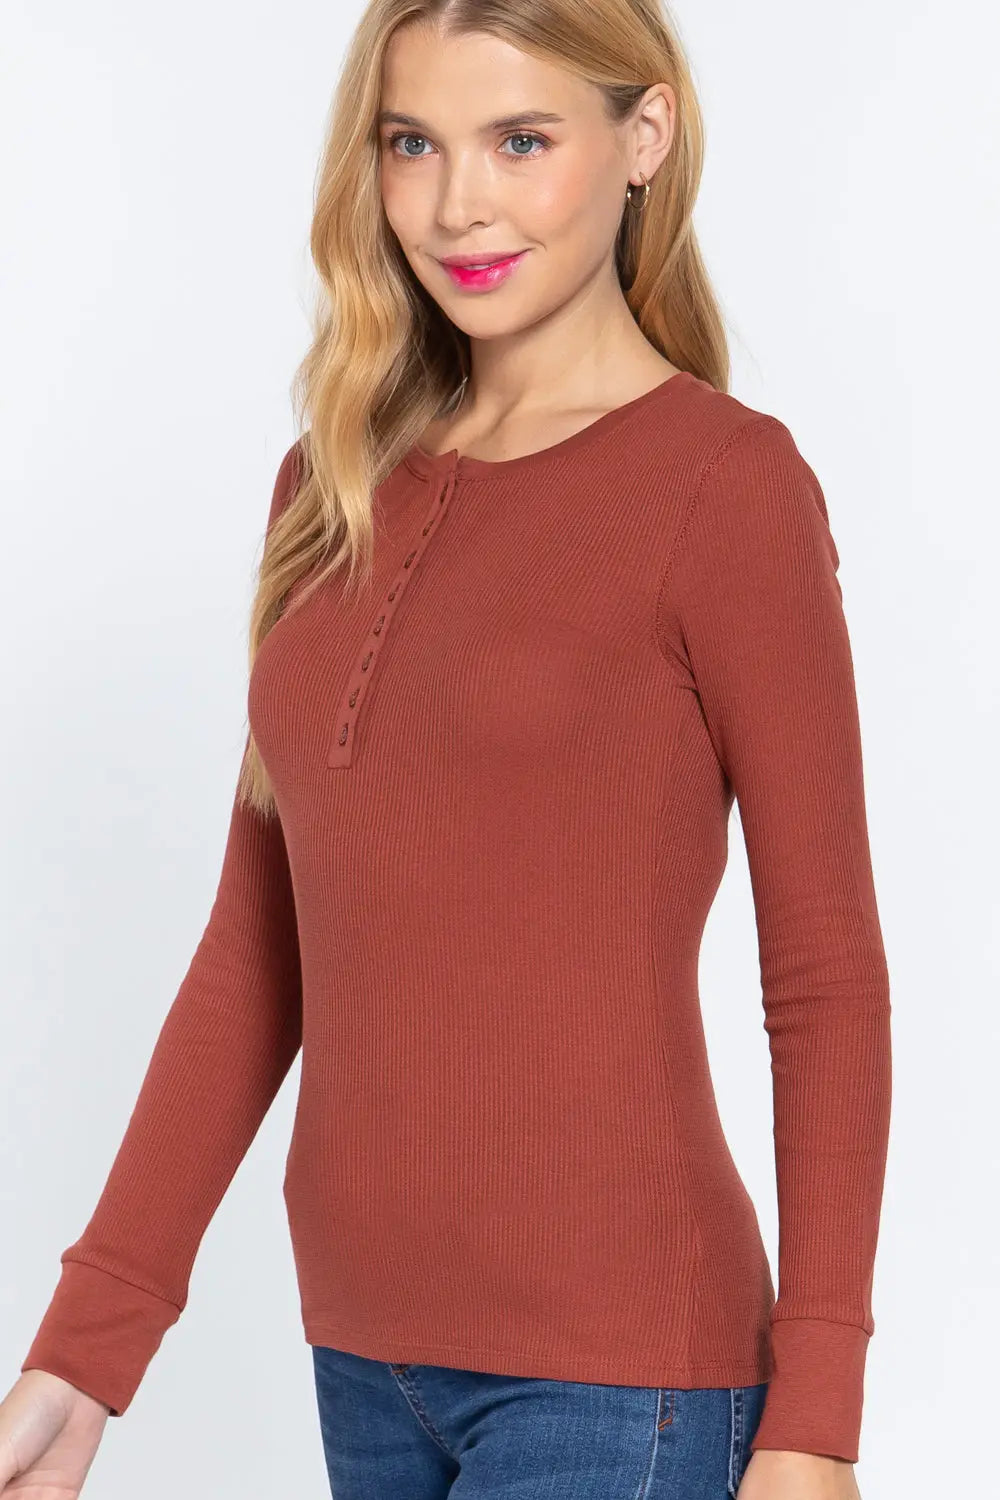 Long Slv Henley Thermal Top Sunny EvE Fashion